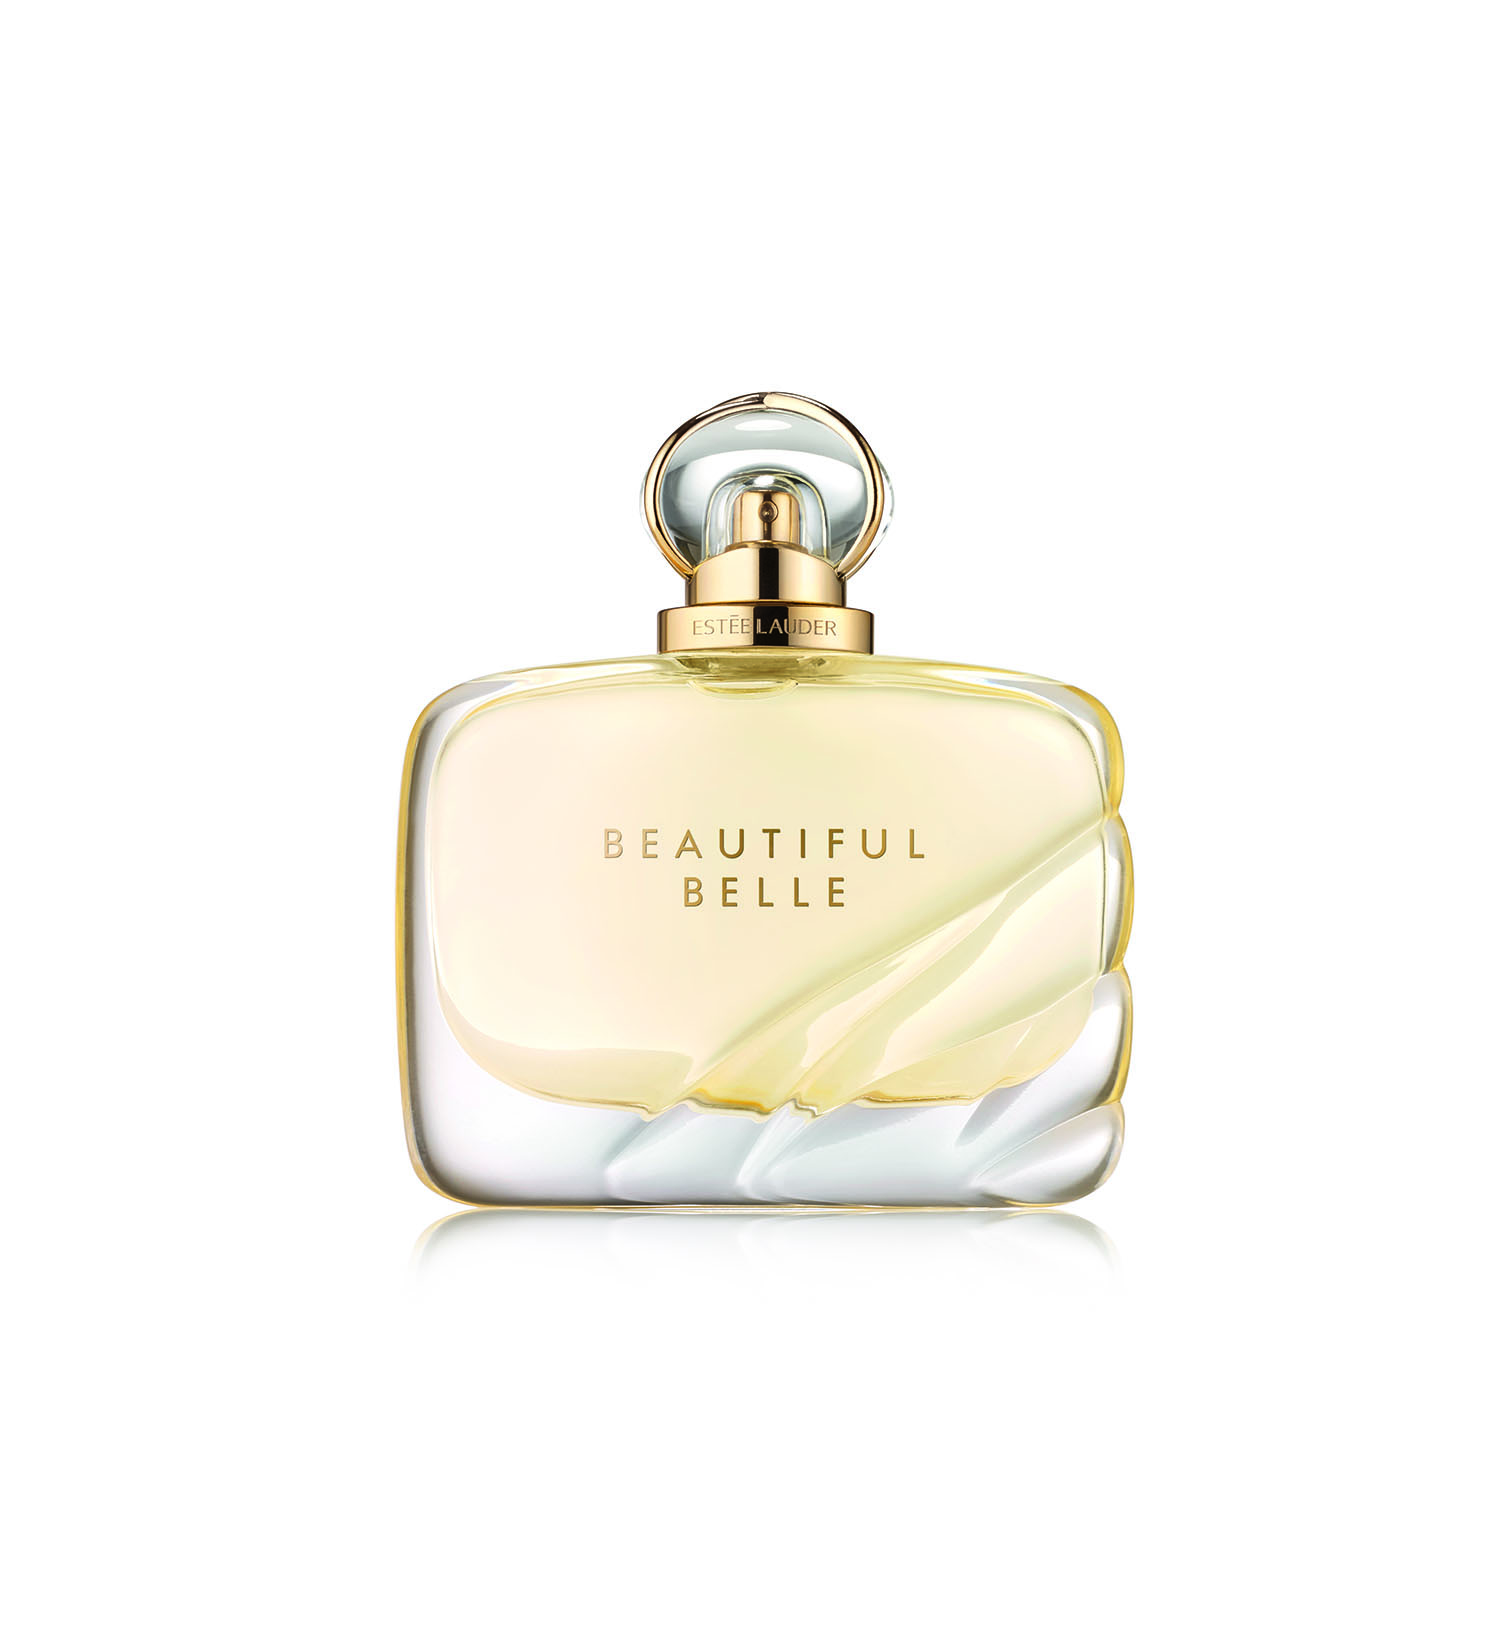 Beautiful Belle_EDP_Product on White_Global_Expiry June 2020 (002)